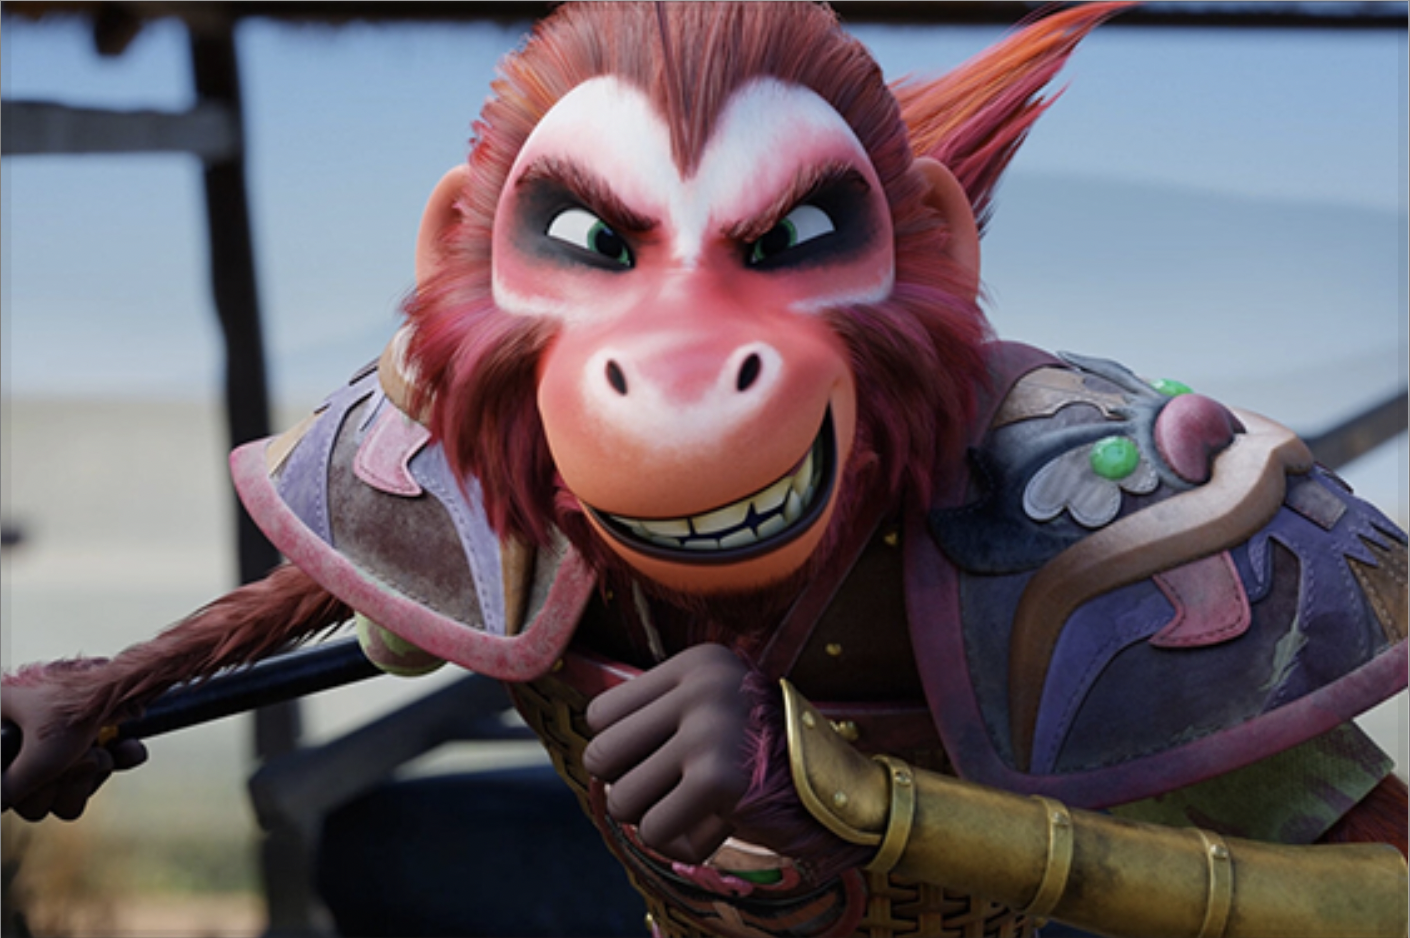 Newly released Monkey King stays true to the original story while adding stimulating visual elements.